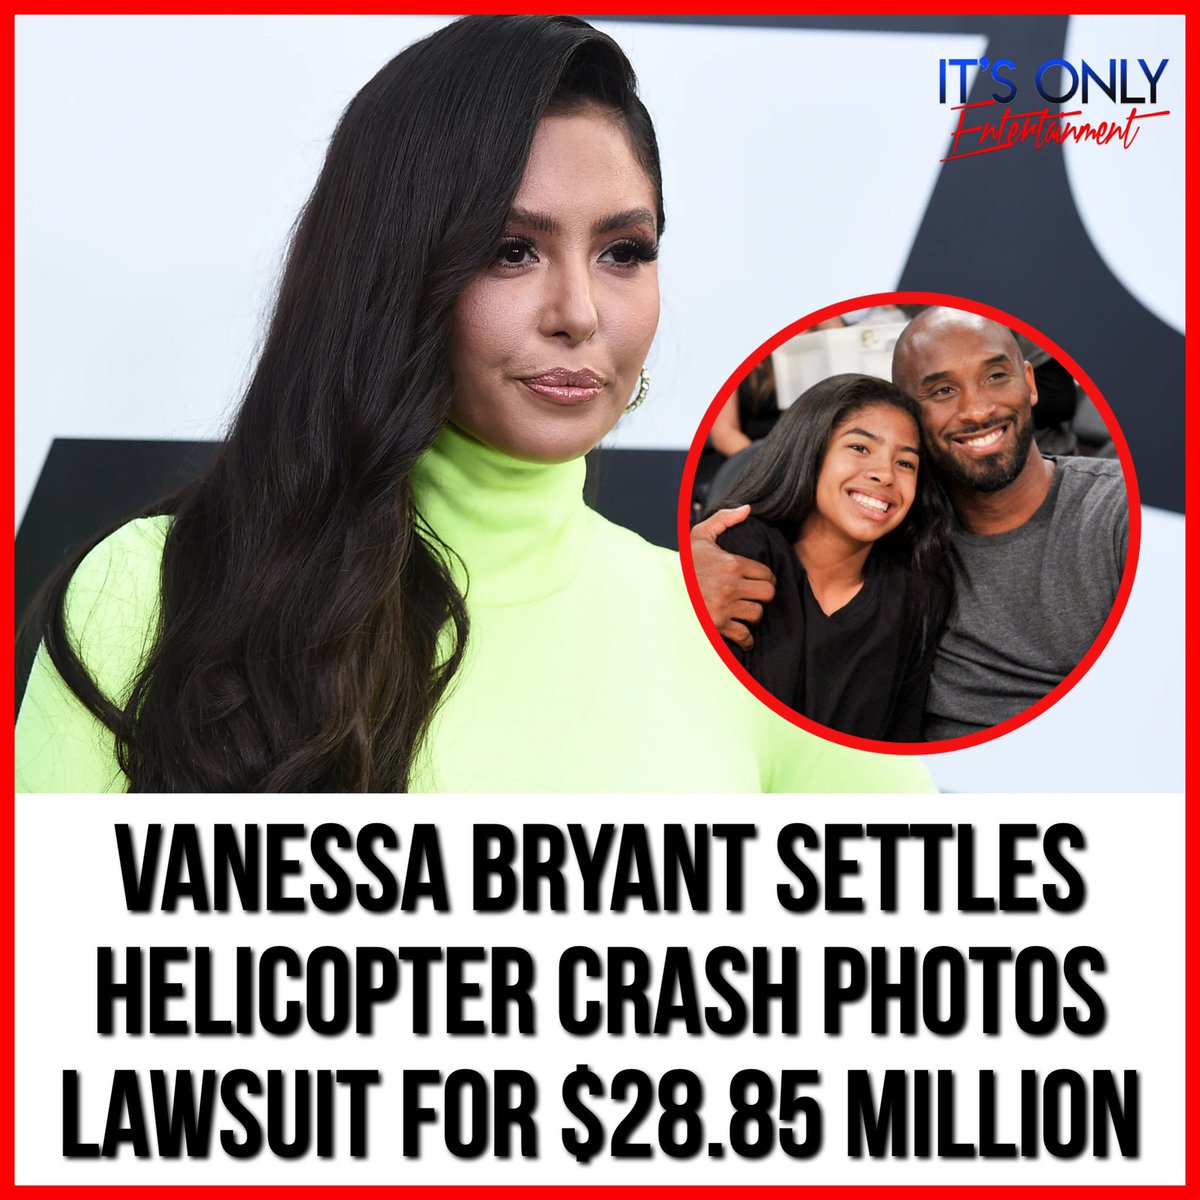 Vanessa Bryant Settles Helicopter Crash Photos Lawsuit for $28.85 Million
CLICK HERE: https://t.co/JugUoFhpaQ https://t.co/nVop6fa8CH